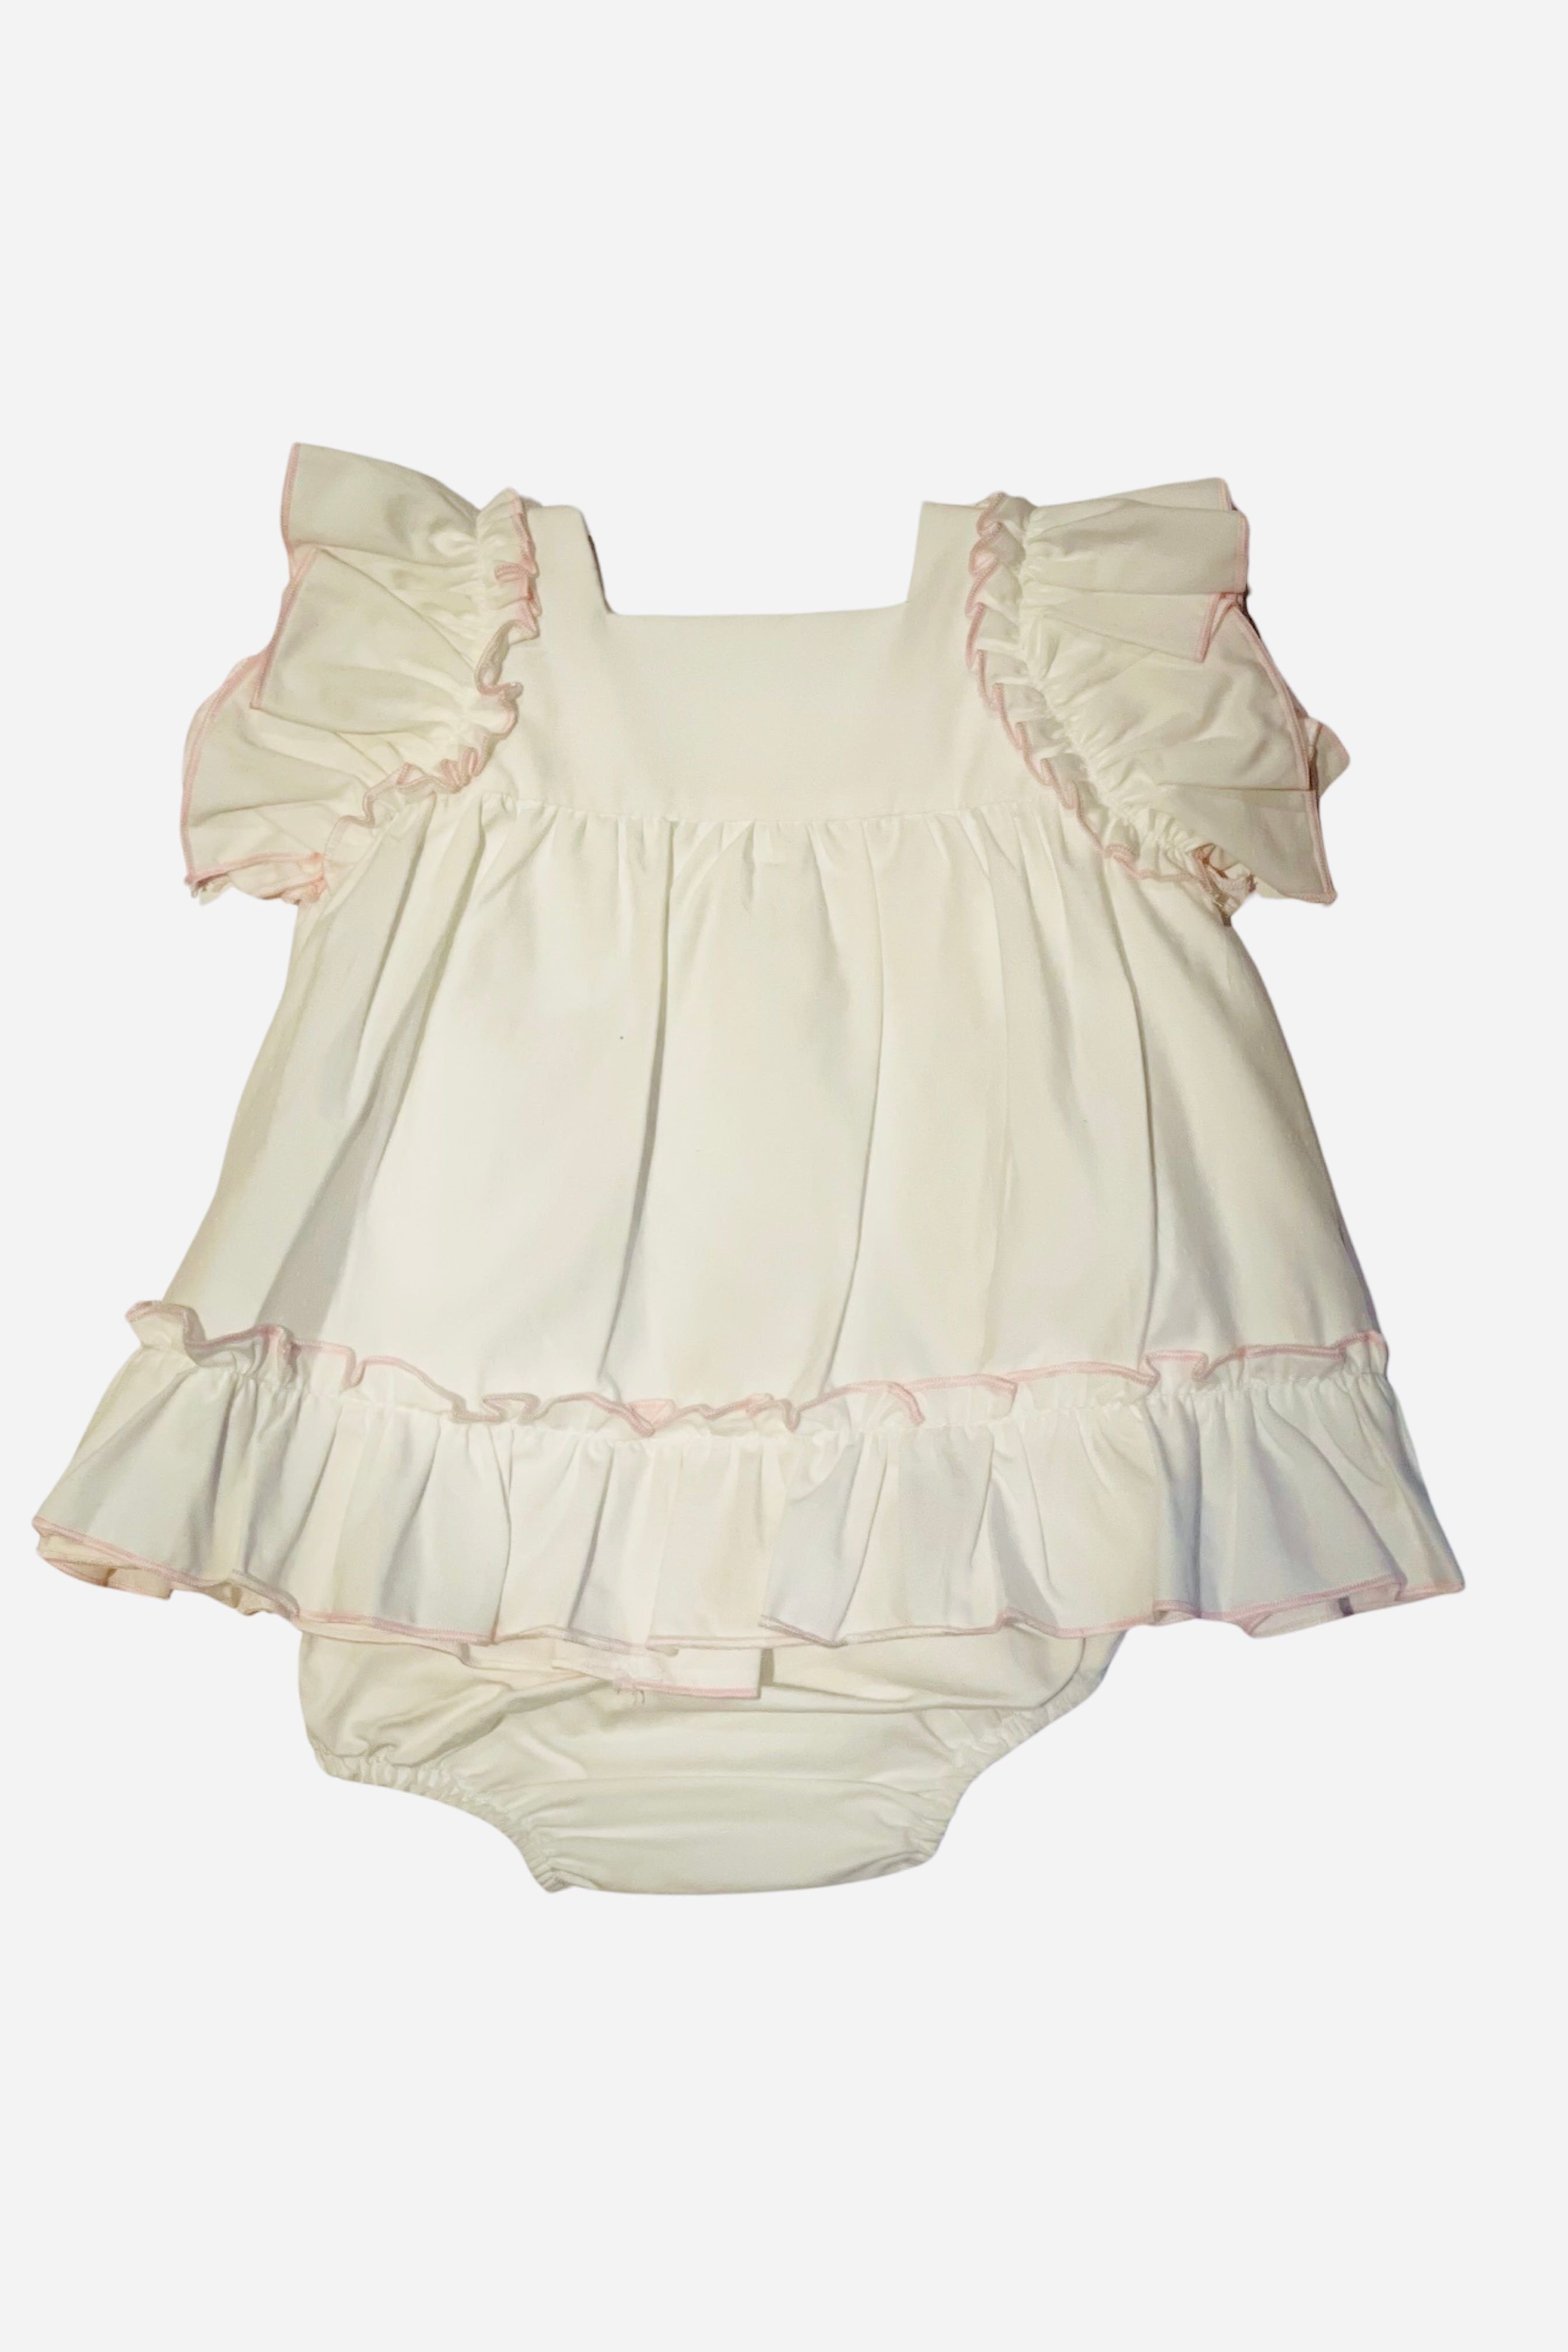 SS24 Lor Miral Baby Girls White Angel Dress & Knickers Dainty Delilah